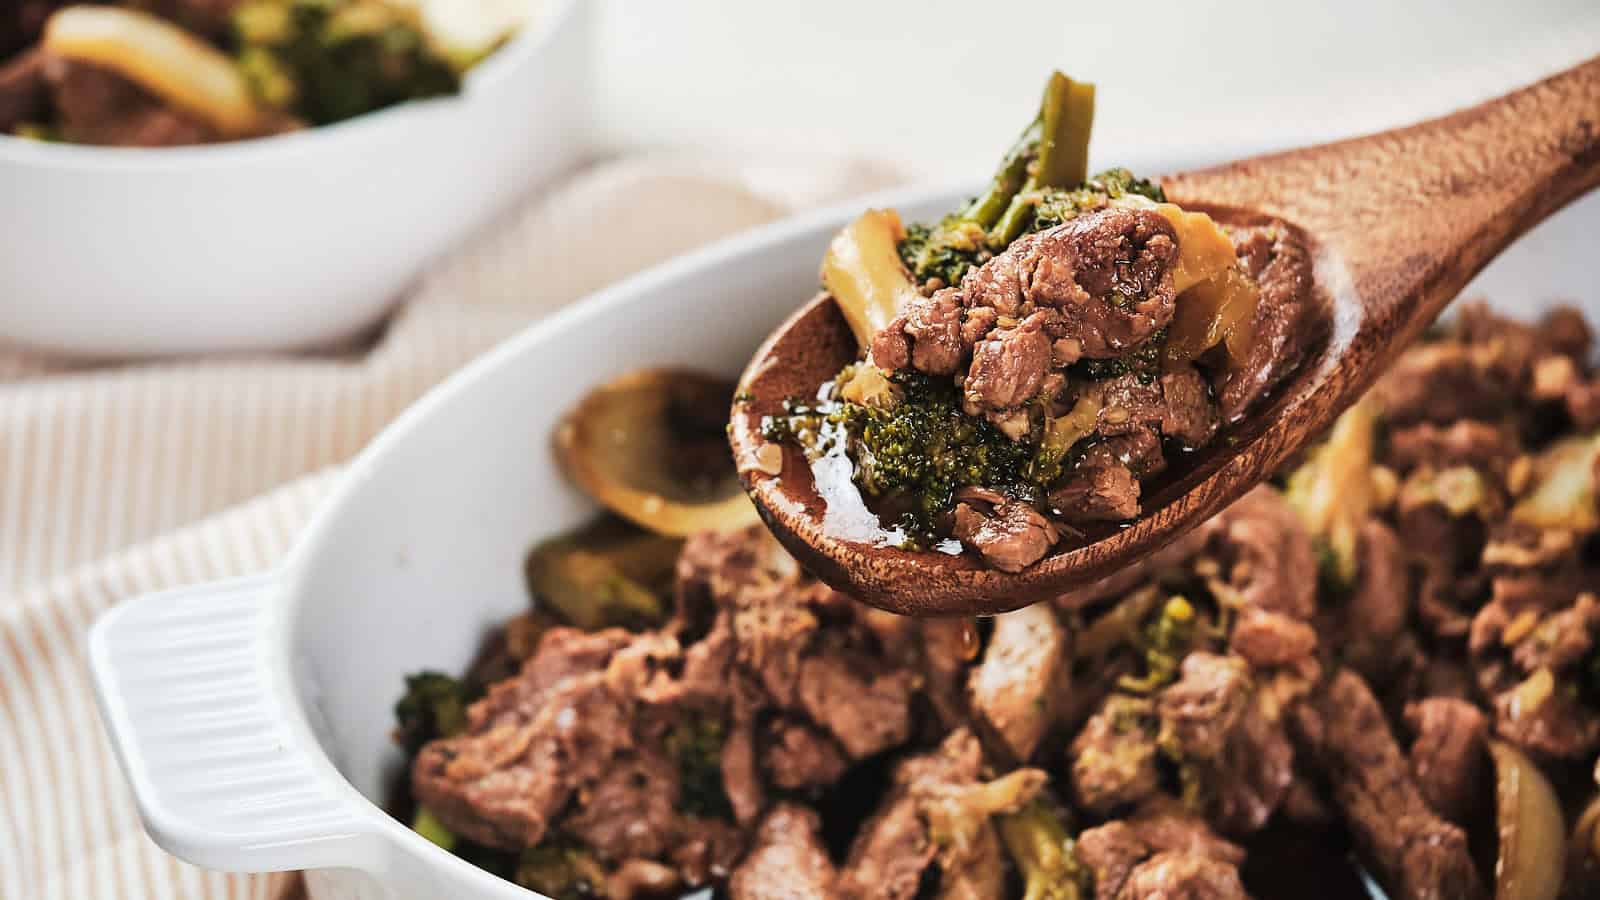 Slow cooker beef and broccoli with onion in brown bowl., A wooden spoon scoops beef and broccoli from a white casserole dish, showcasing the meal's rich sauce and tender chunks of meat.